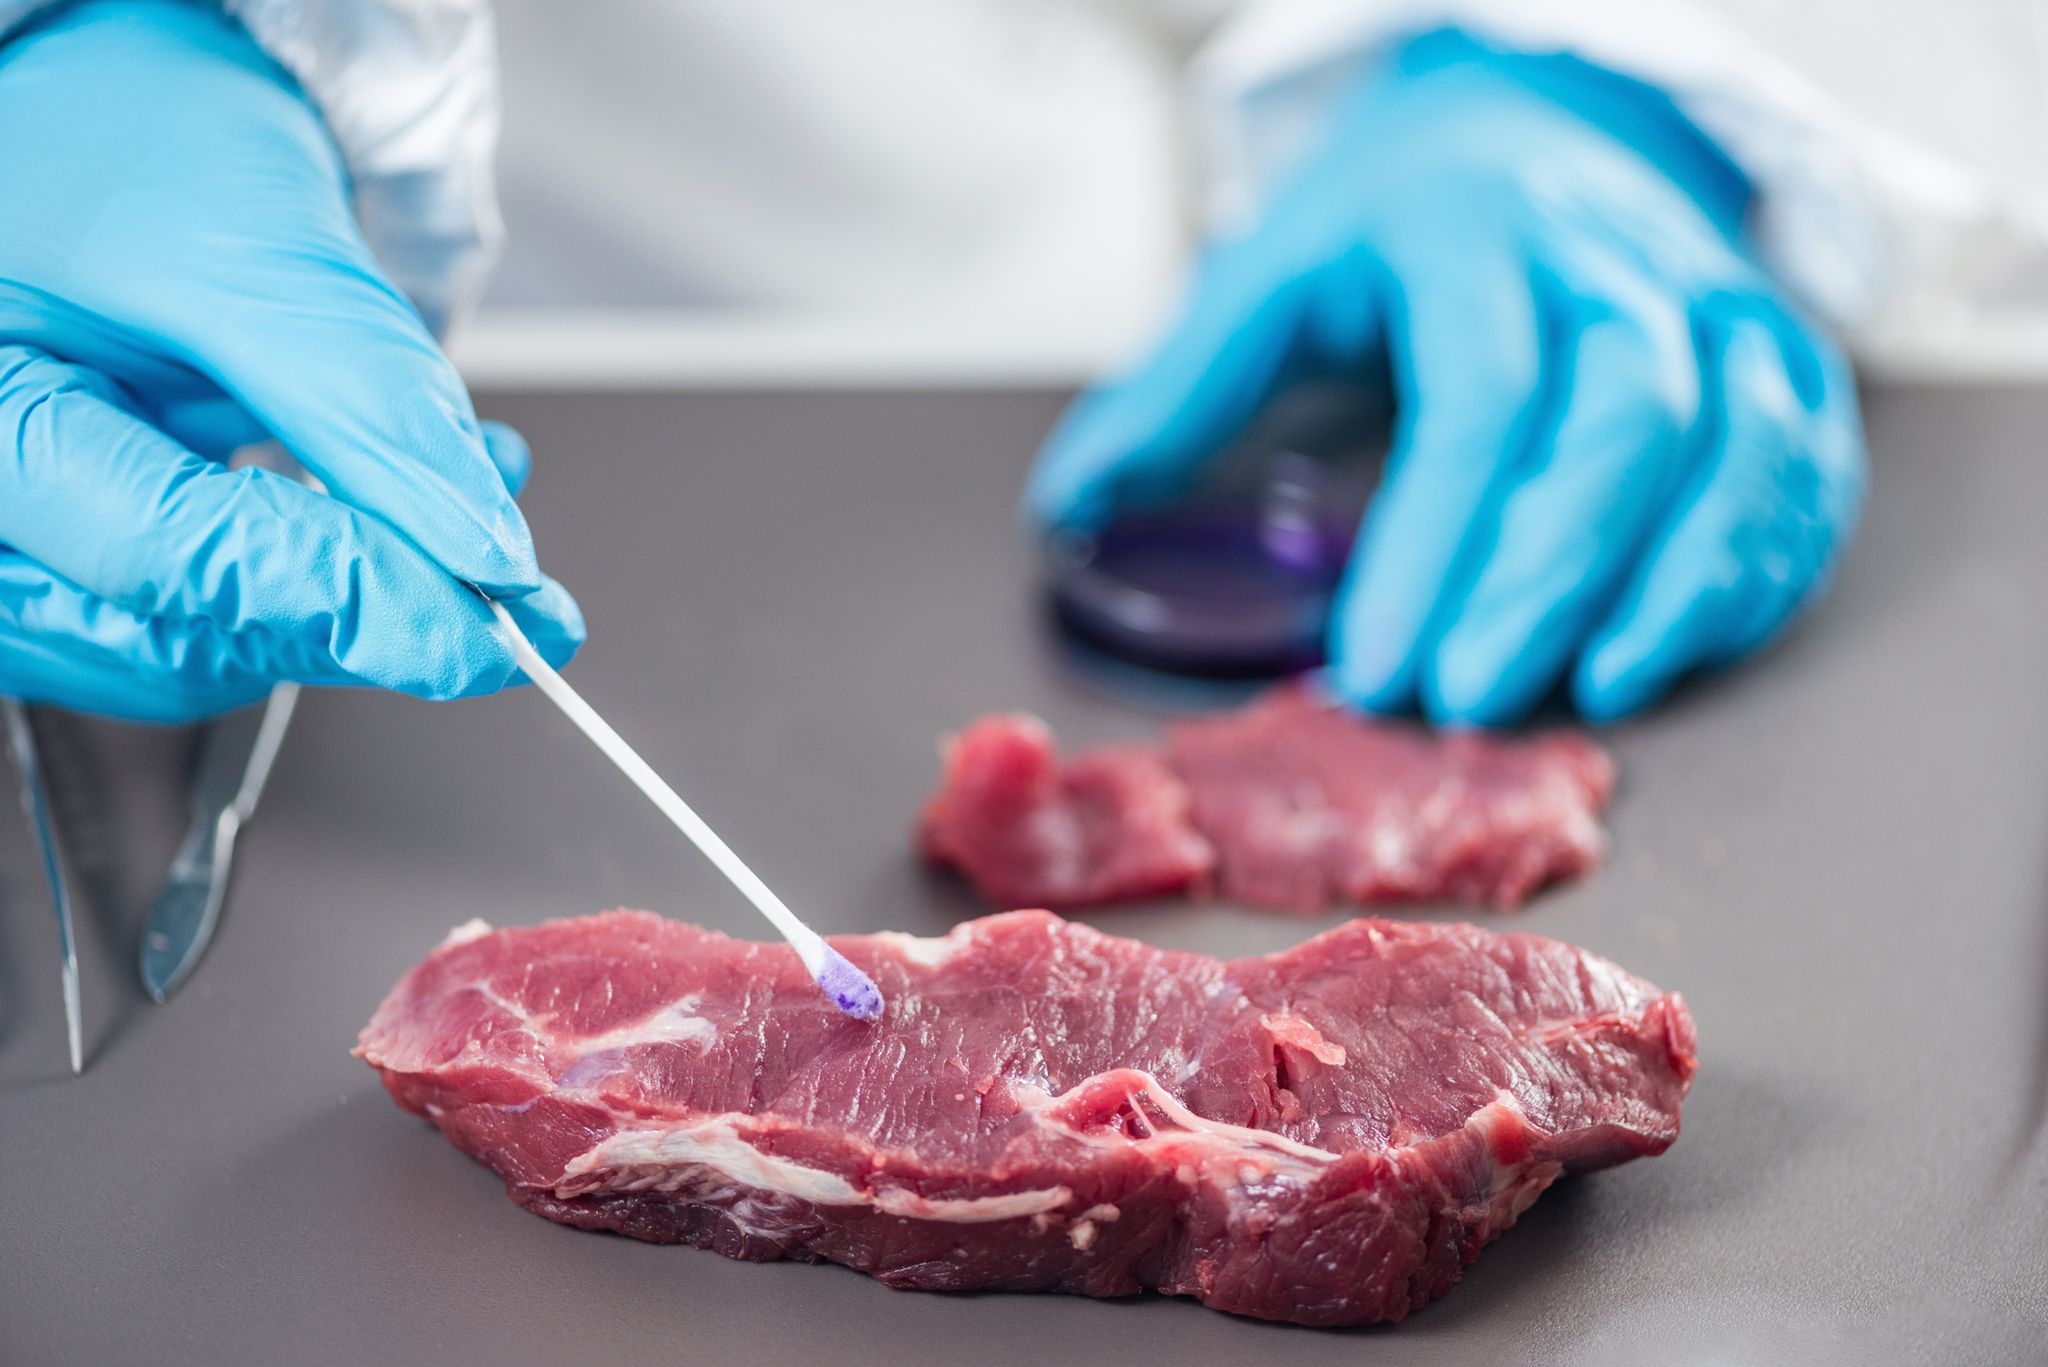 Bloody good idea? Could 'wasted' animal blood be alternative protein source?